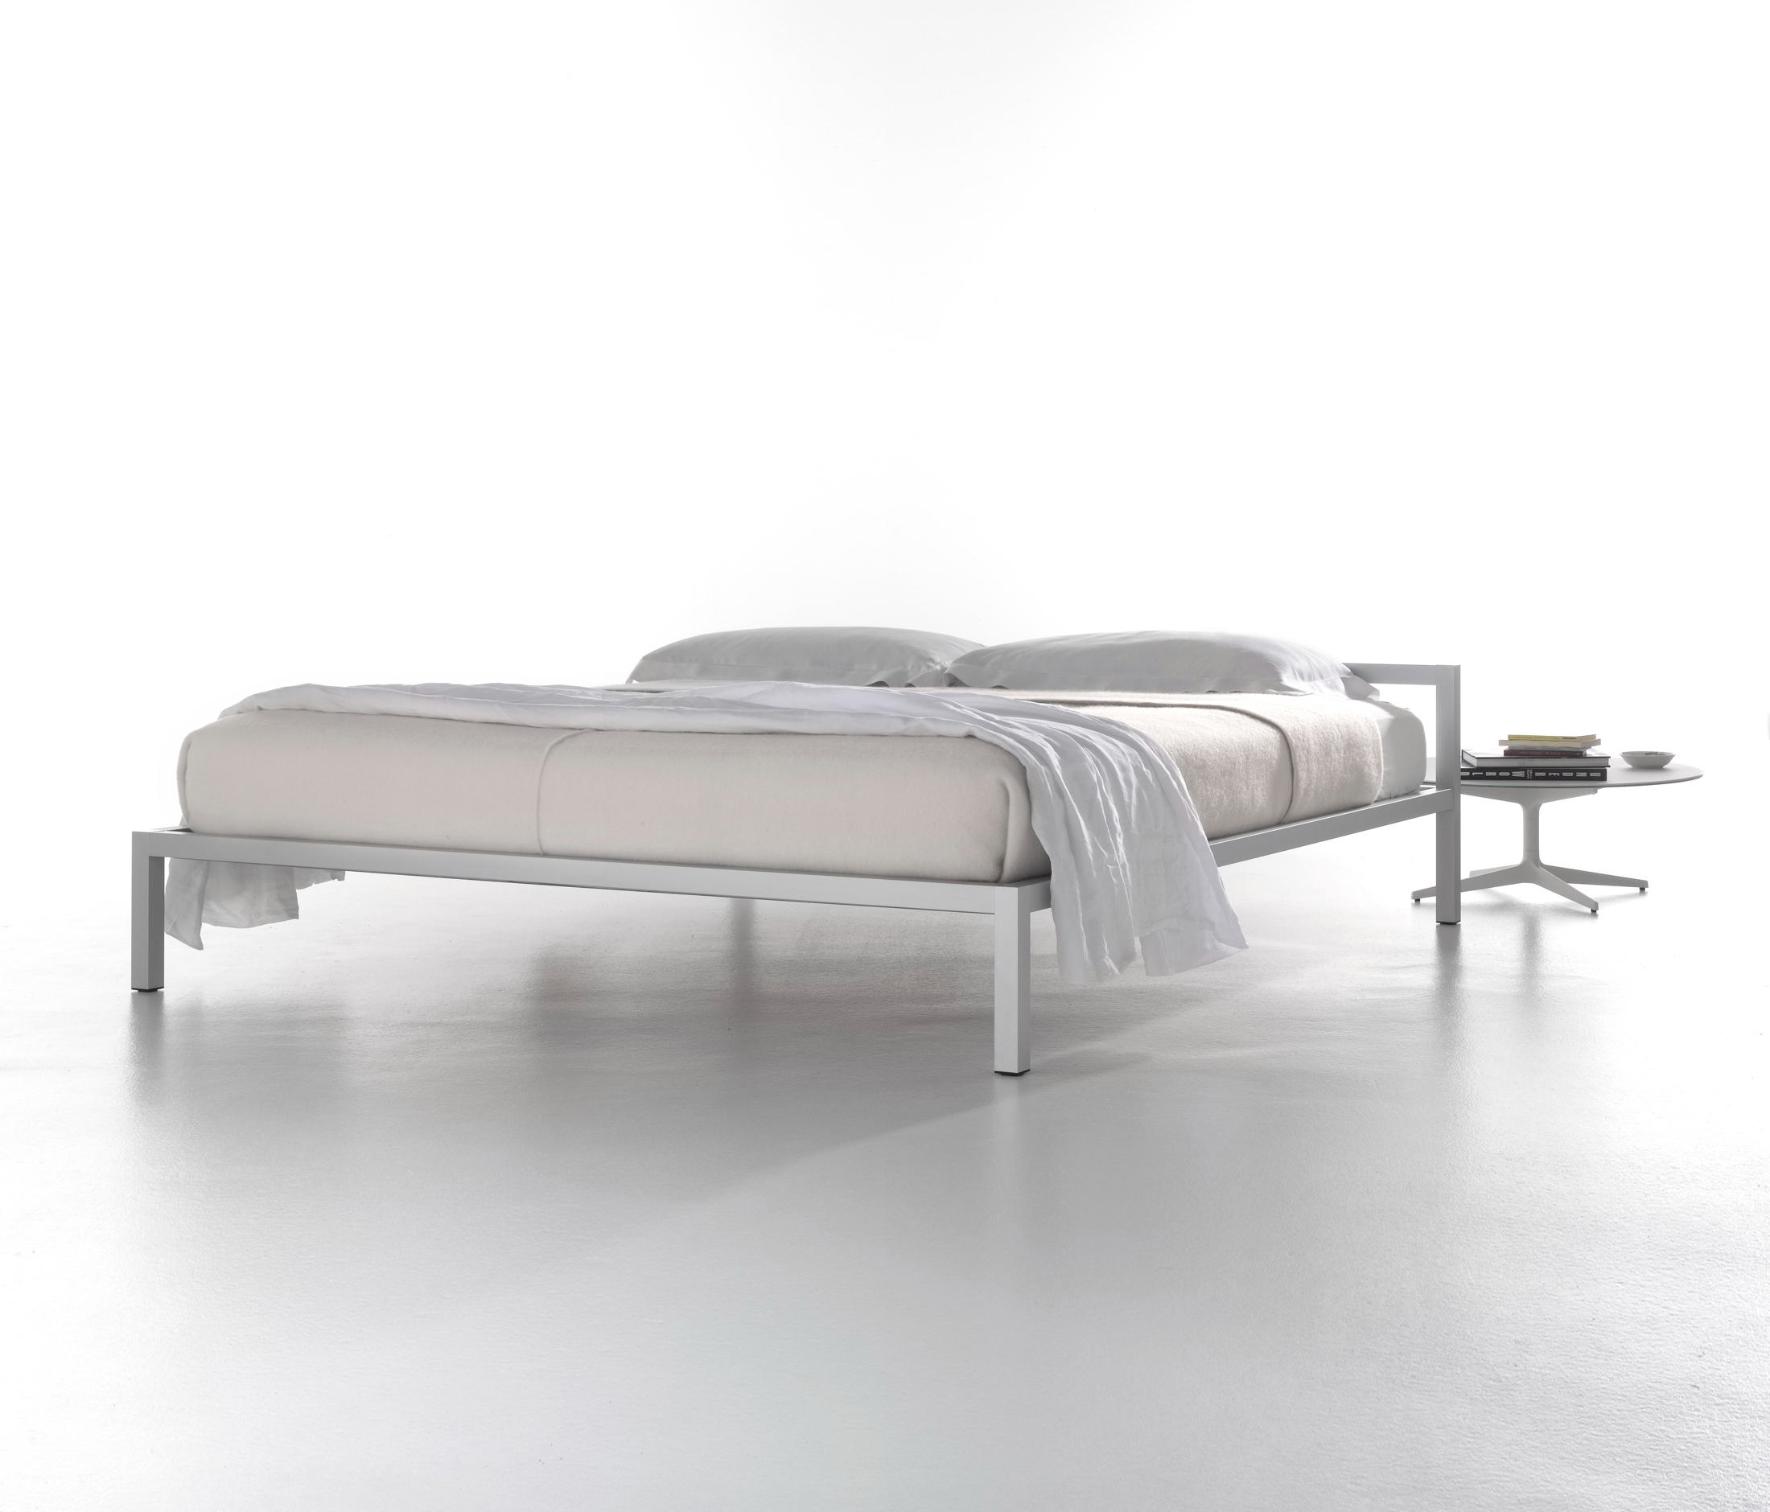 Aluminium Bed with Italian Precision ☞ Structure: Gloss Painted White X060 ☞ Dimensions: 190 x 210 cm